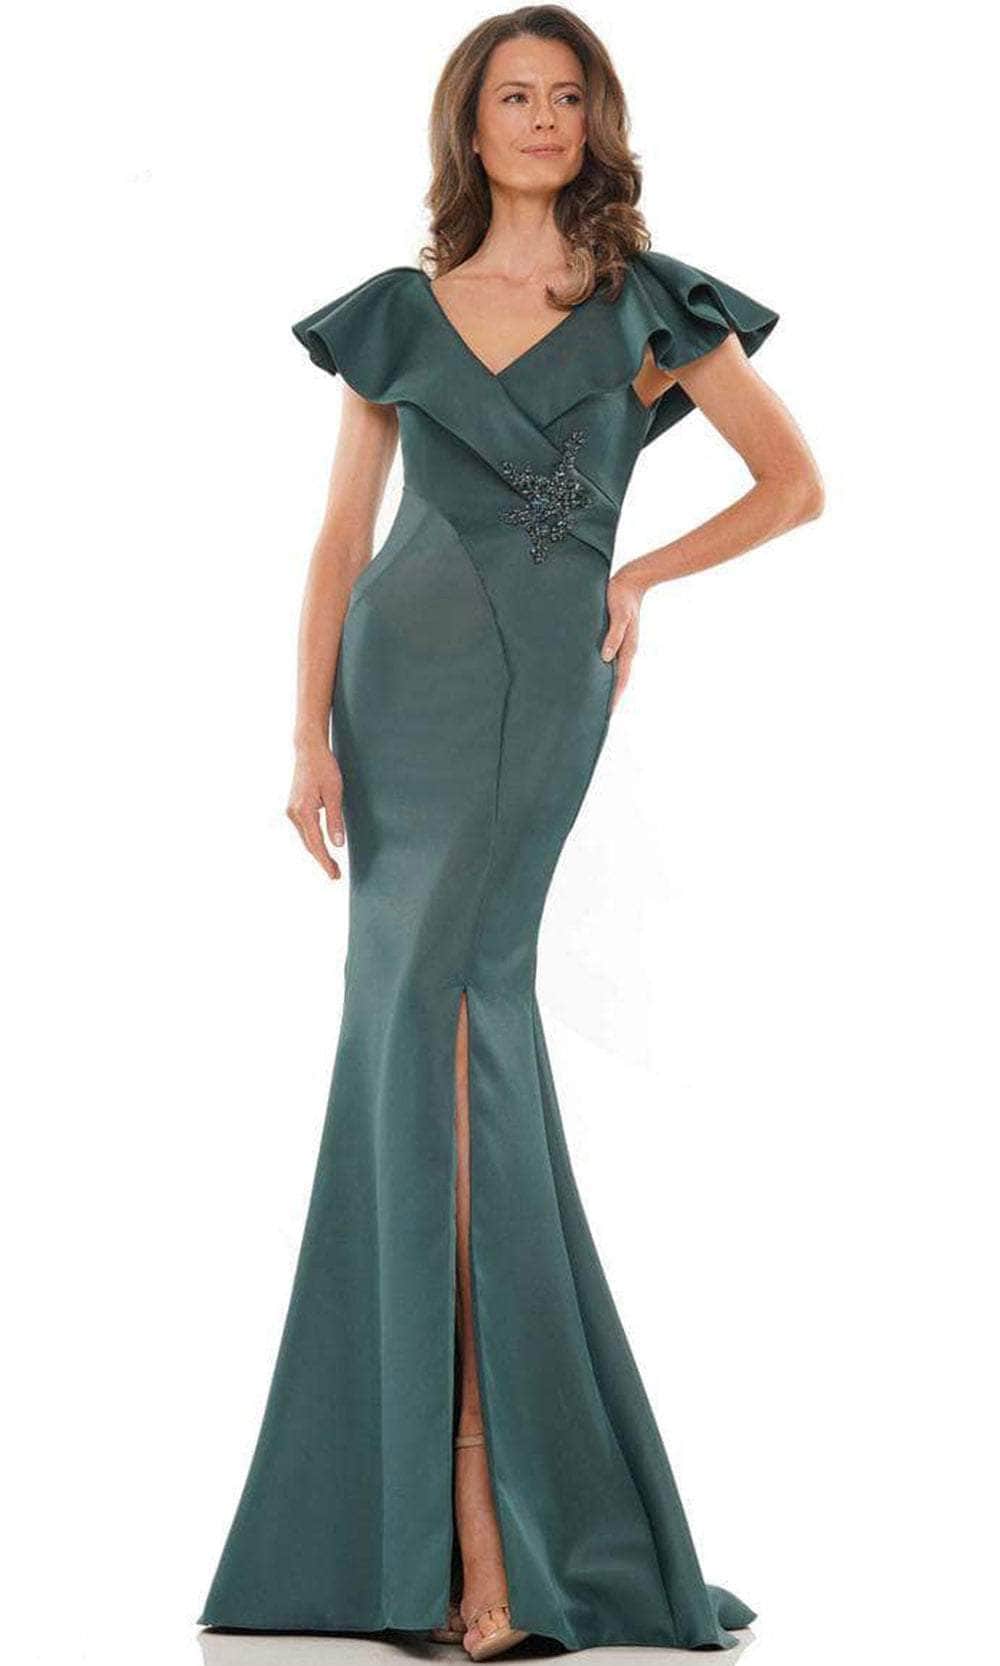 Marsoni by Colors MV1190 - Ruffled V-Neck Long Dress Special Occasion Dress 4 / Deep Green